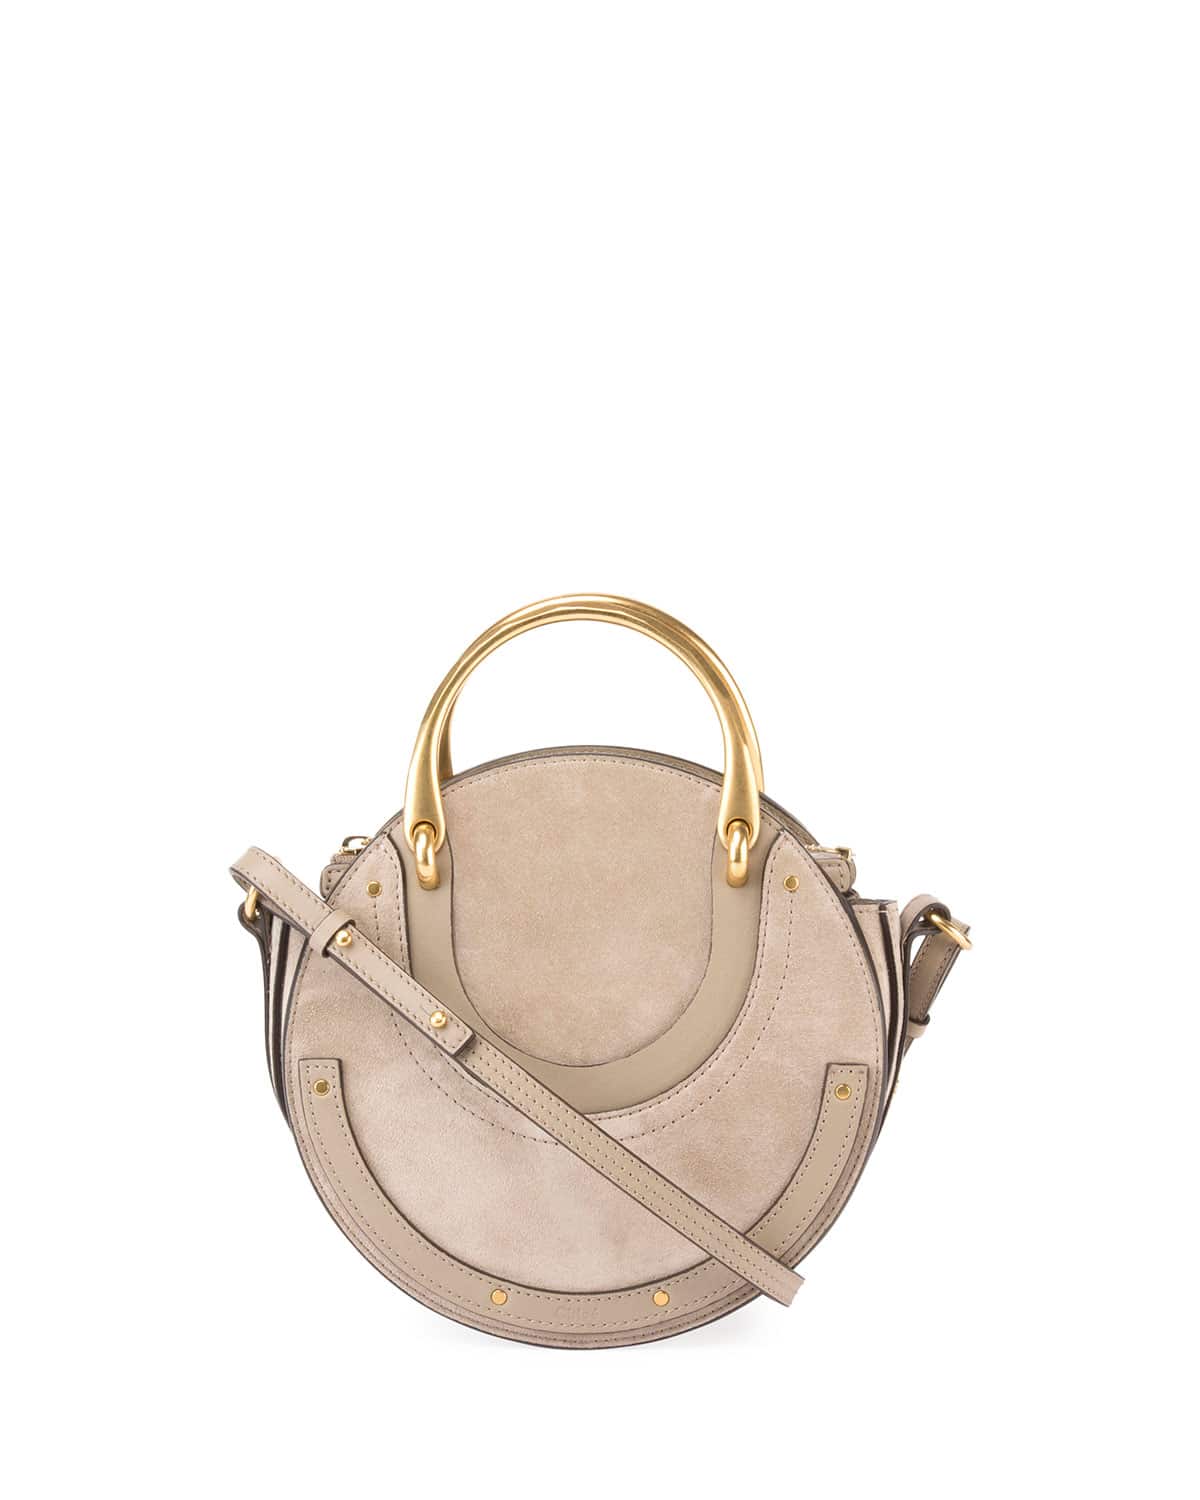 Chloe Bag Price List Reference Guide - Spotted Fashion